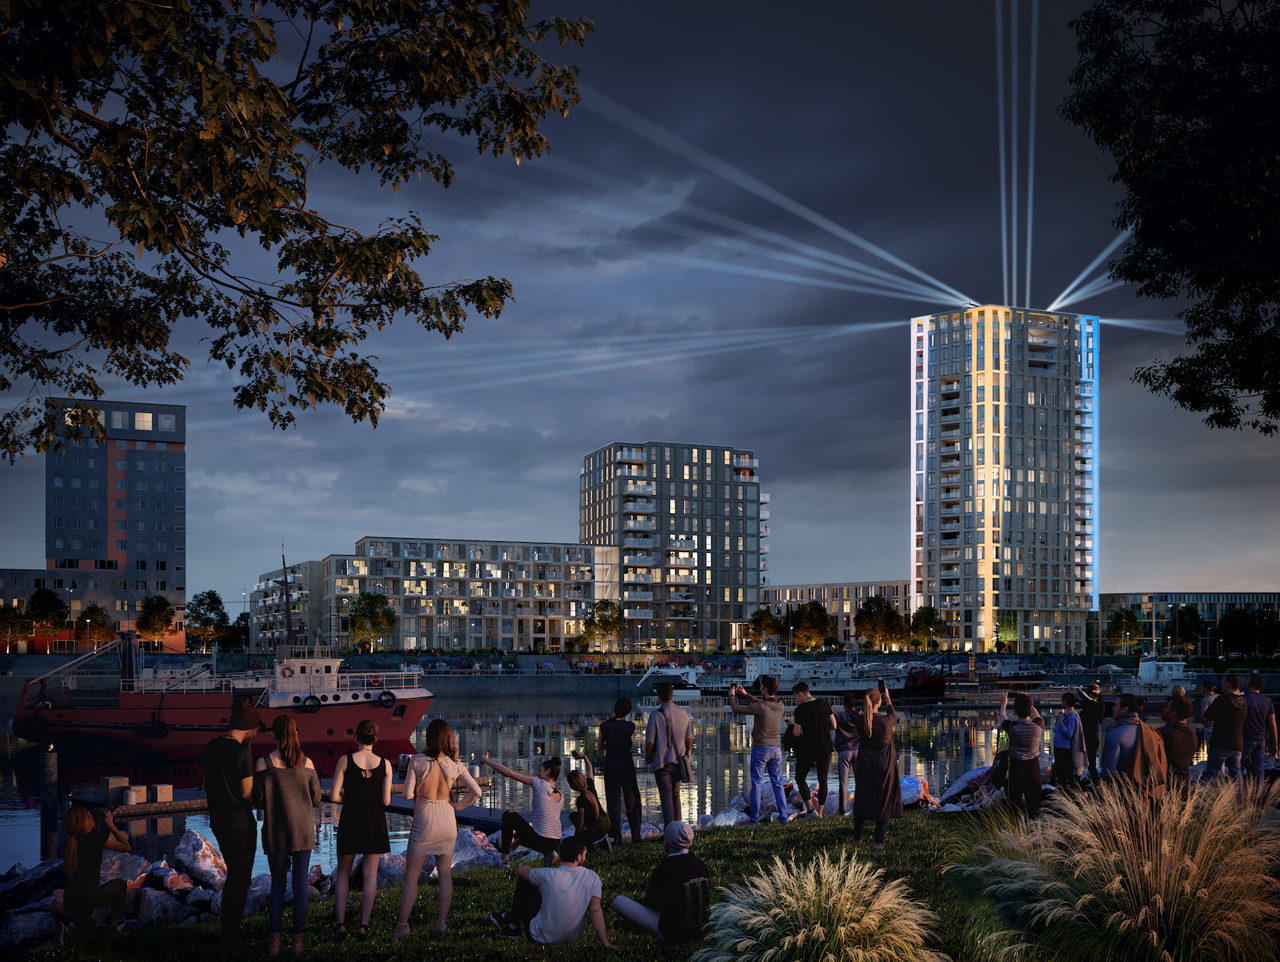 Architectural visualization of an urban complex with spectators enjoying the light show on the facade of the highest tower from a river bank